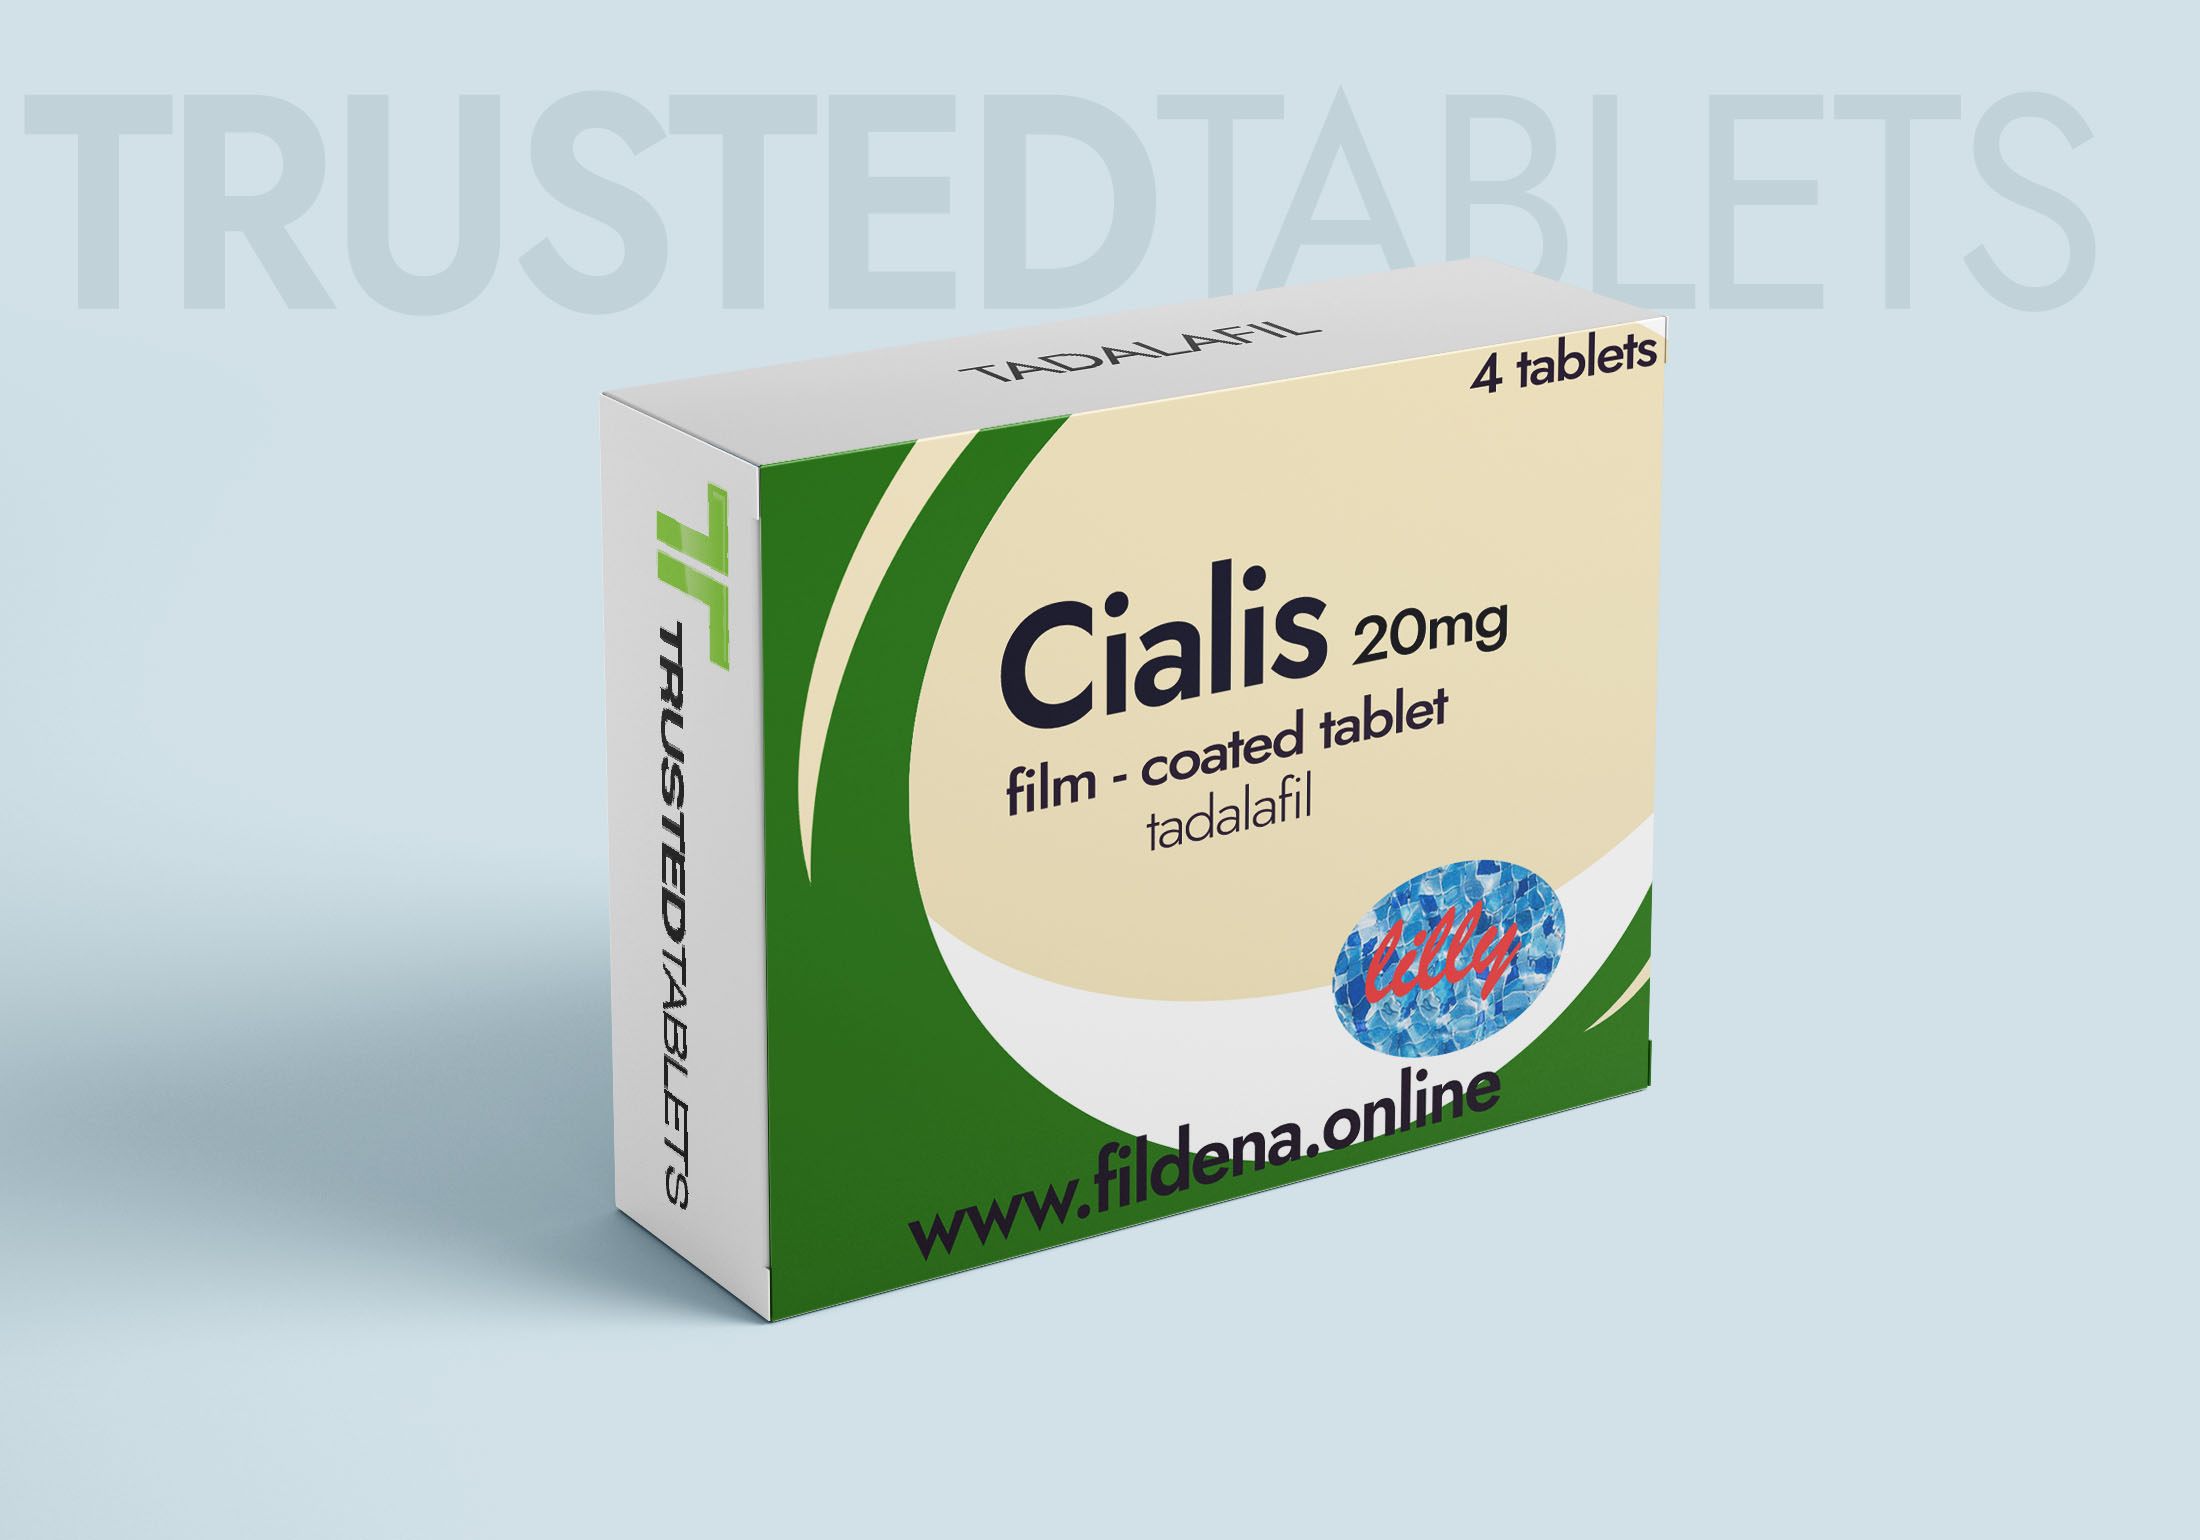 Cialis TrustedTablets